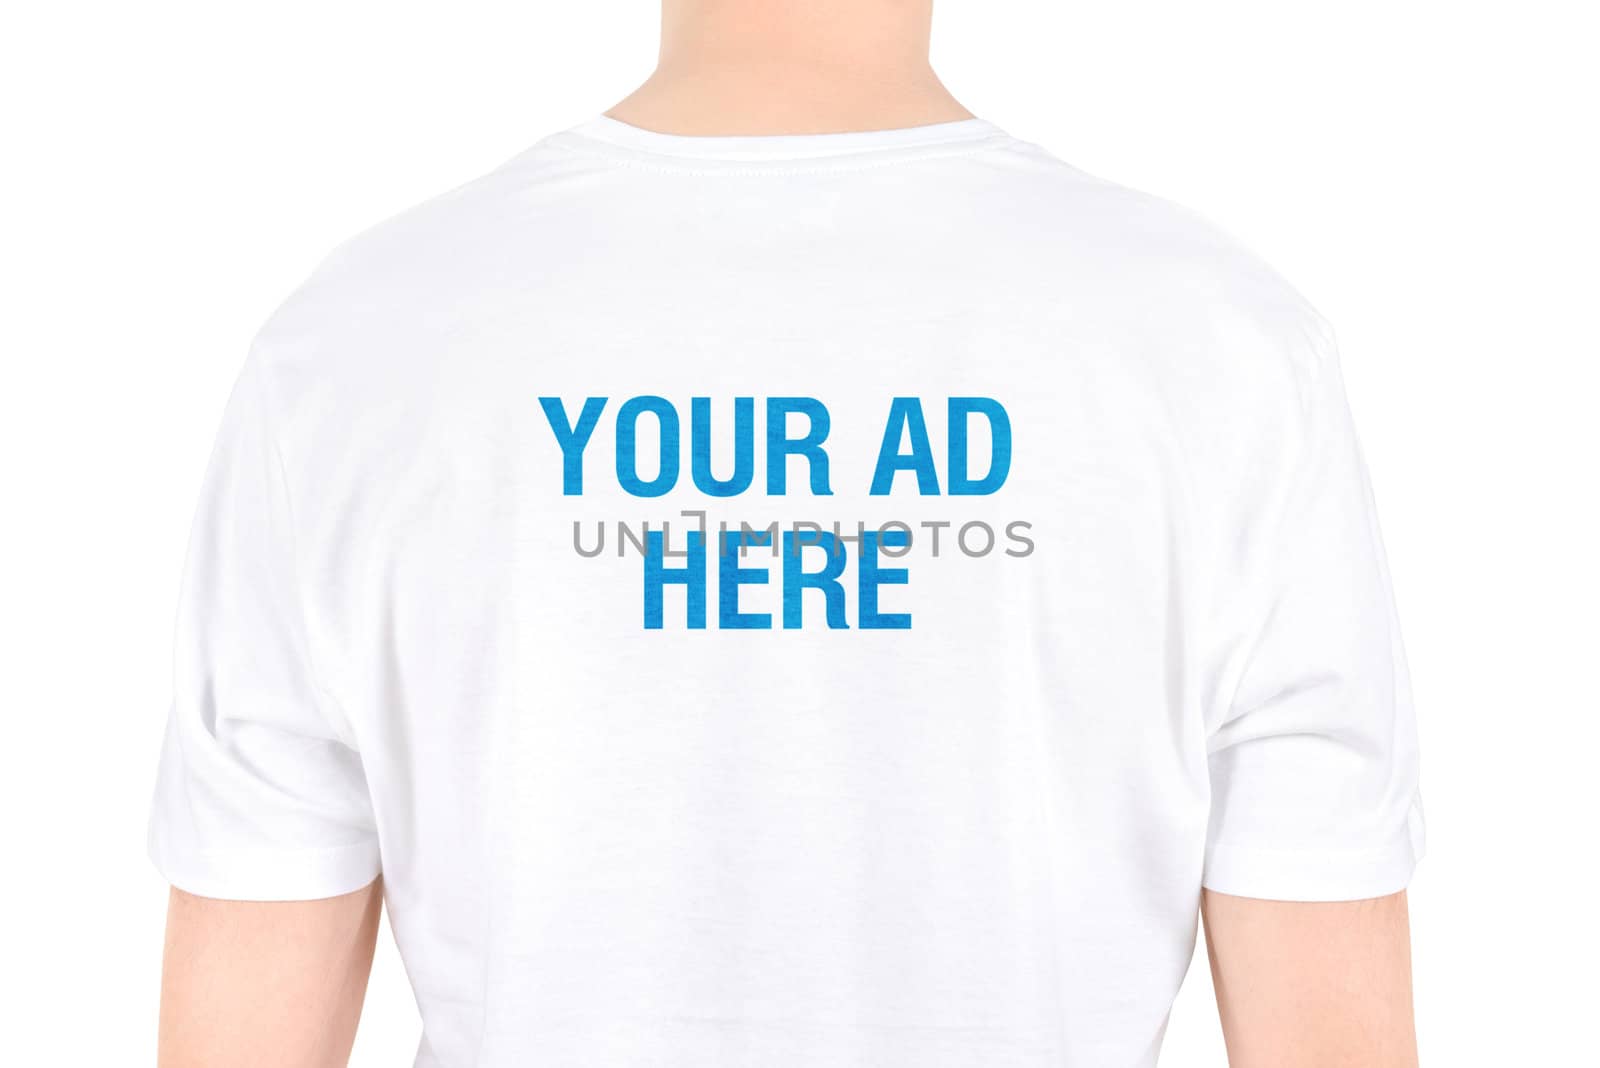 Your AD here concept by bloomua